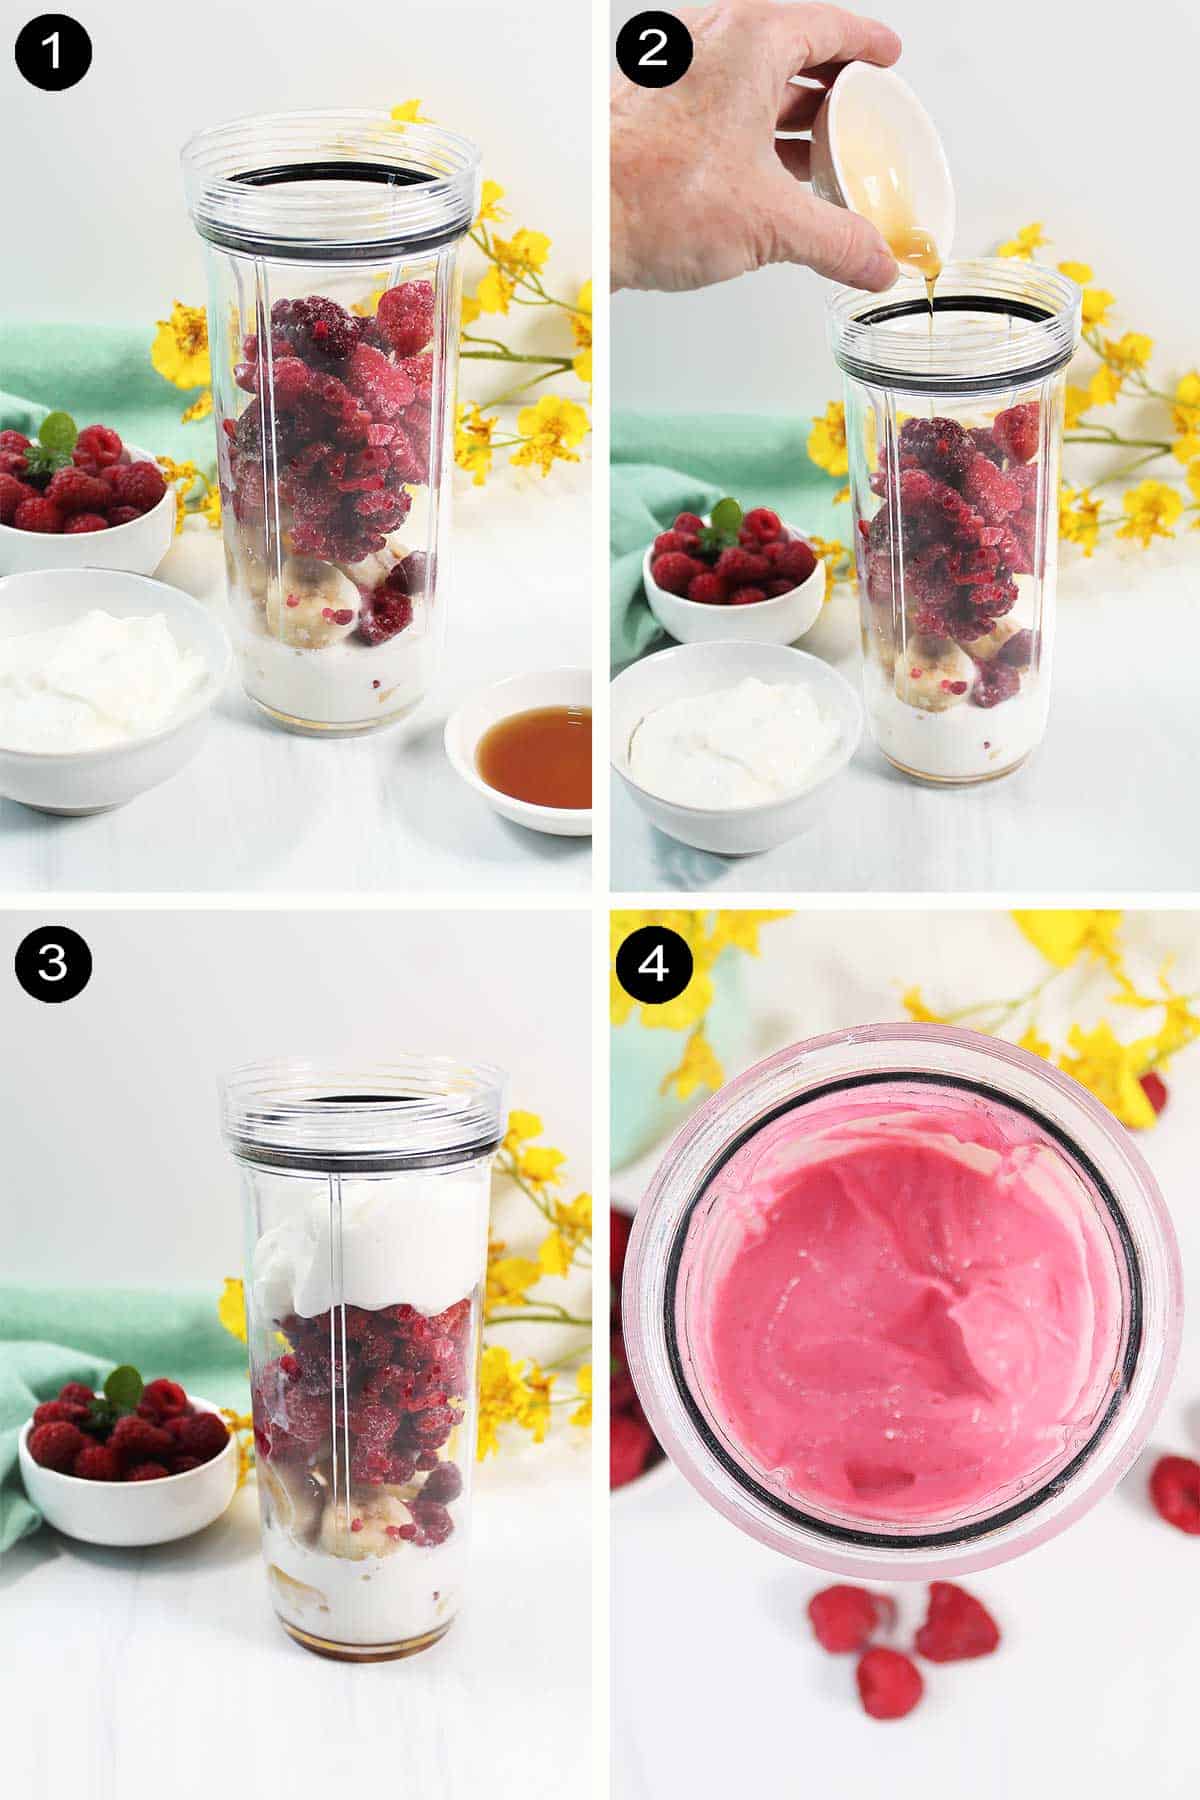 How to make smoothie.